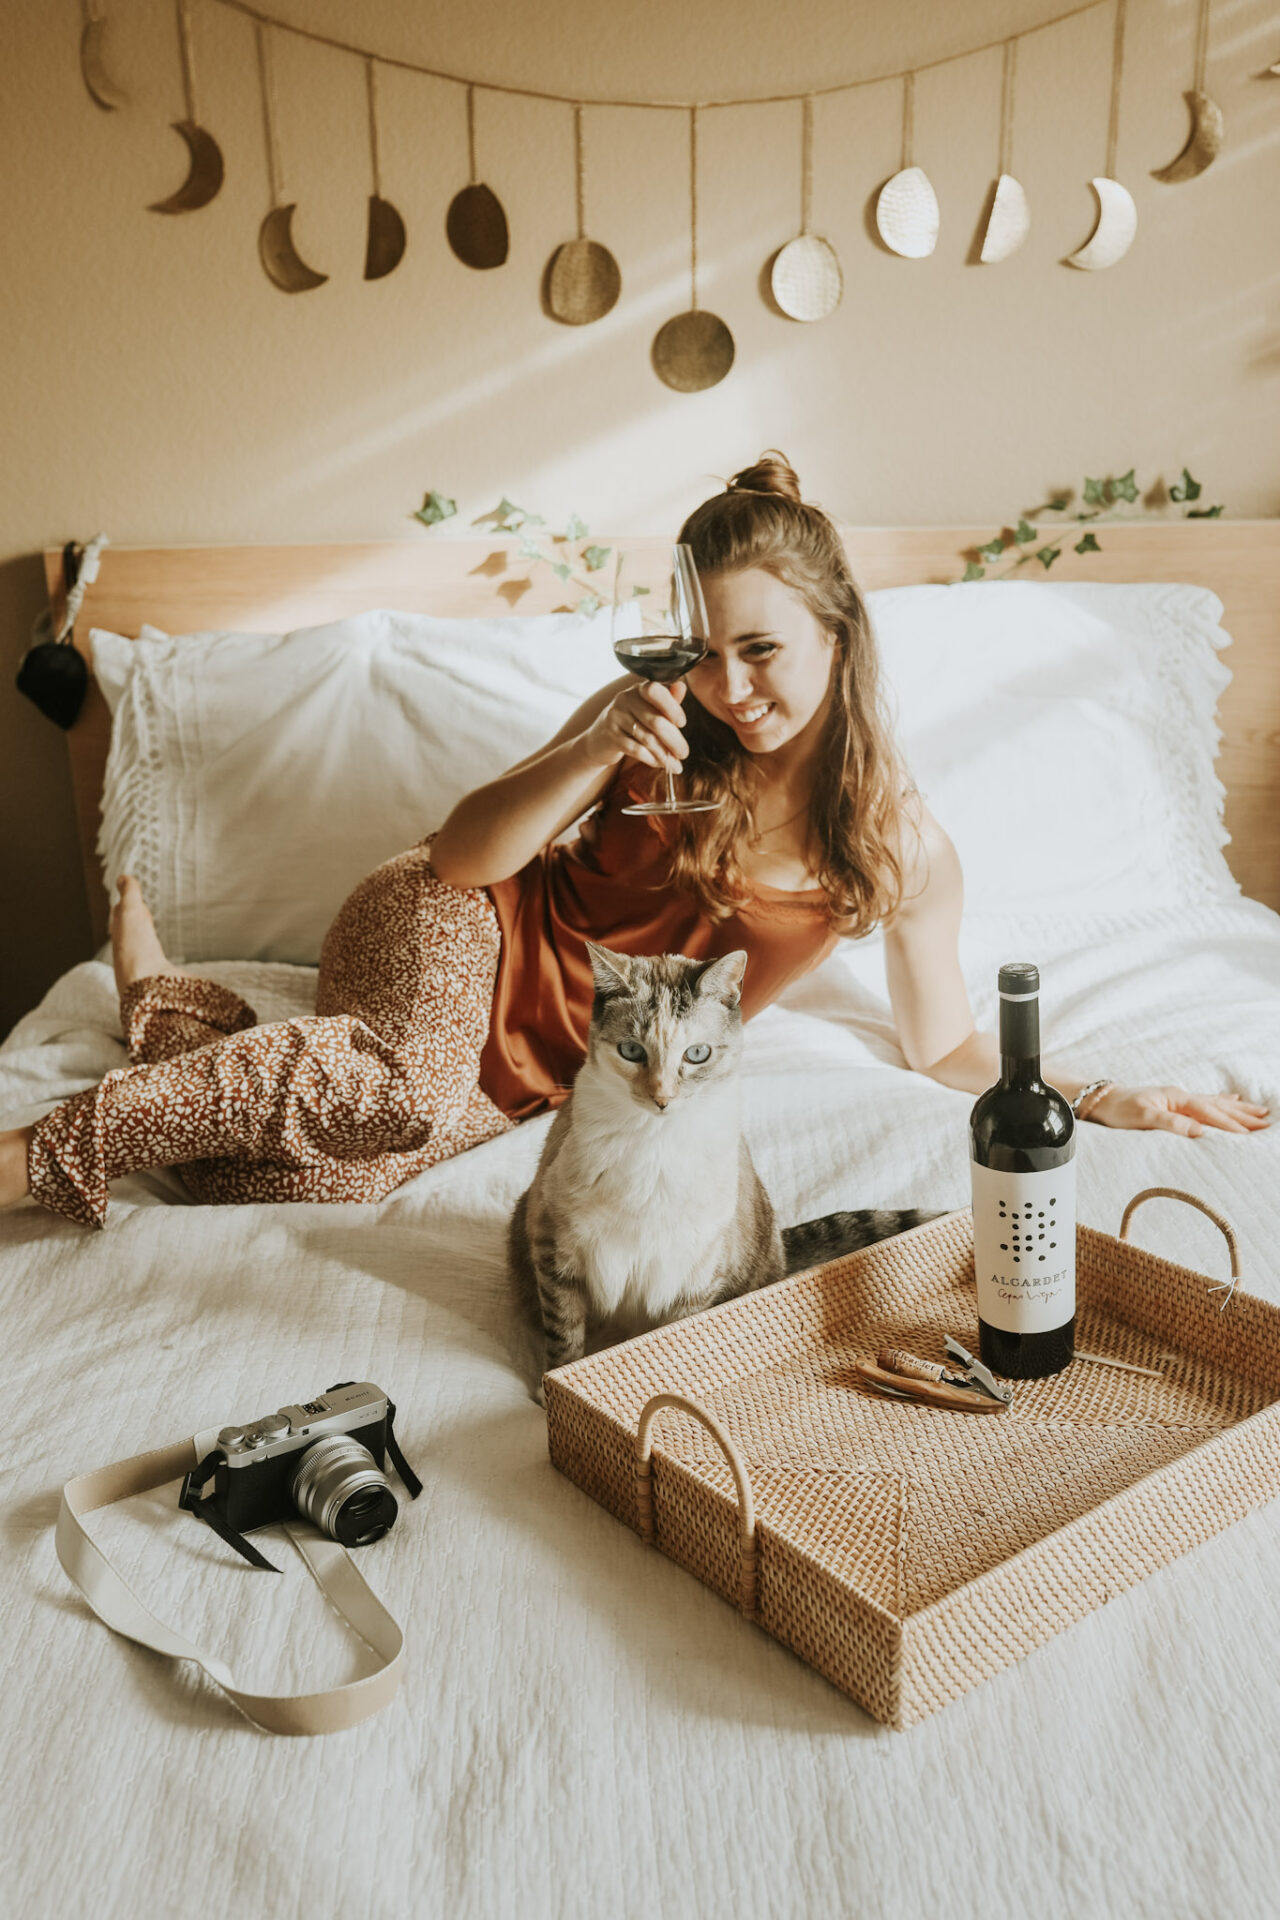 Malbec vs Merlot Wines - Paige on a white bed with red wine and her cat, Arwen. A camera is in the foreground